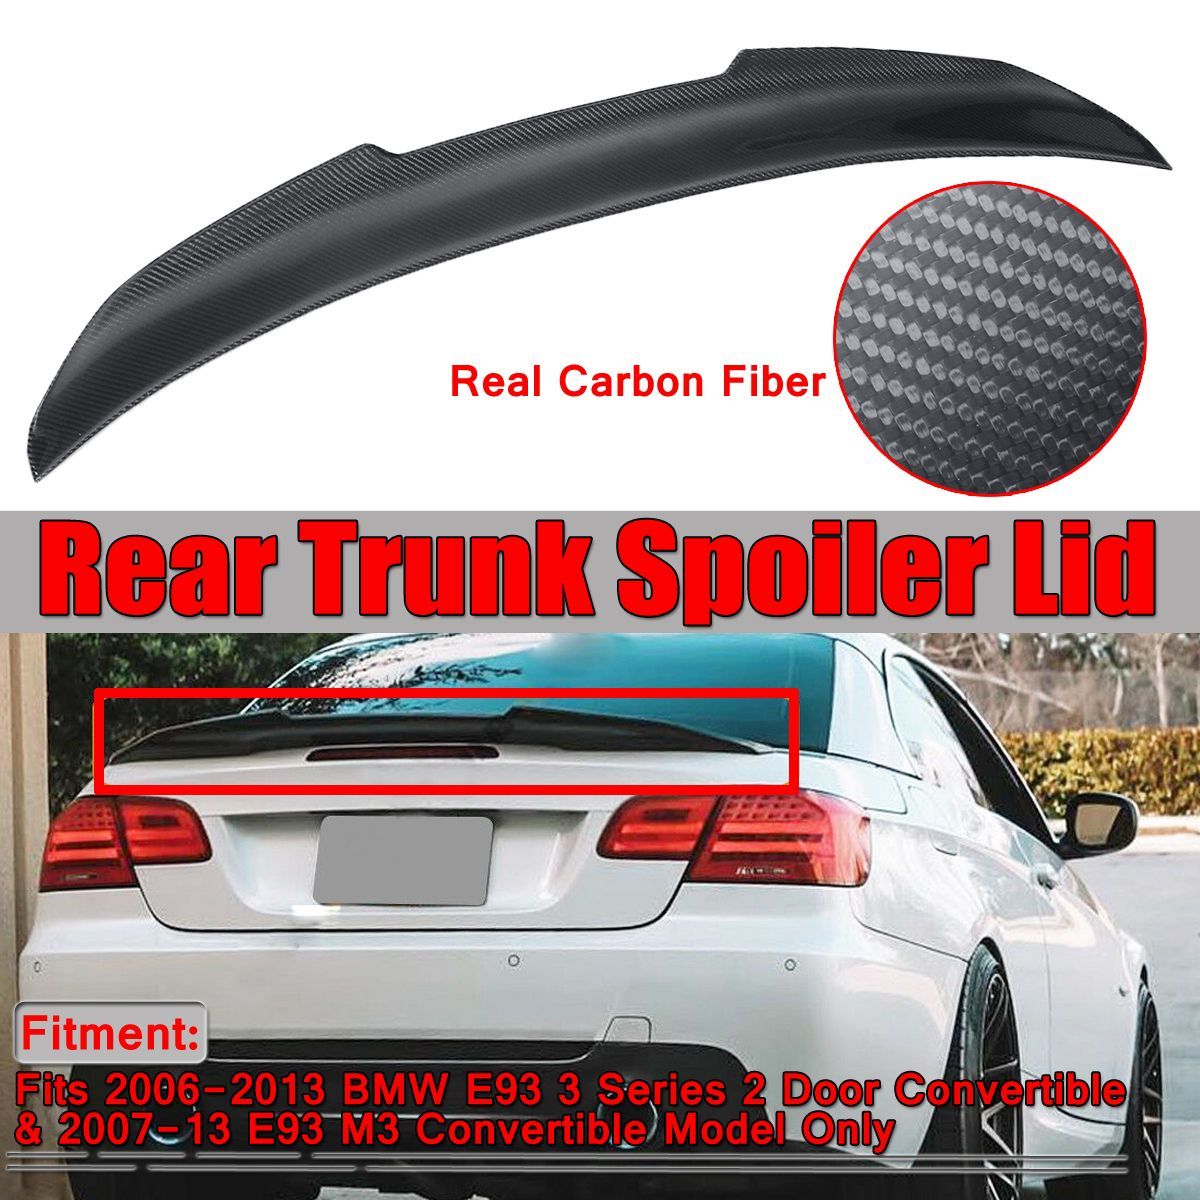 Carbon-Fiber-PSM-Style-Car-Trunk-Spoiler-Wing-For-BMW-E93-335i-328i-M3-Convertible-2007-13-1556976